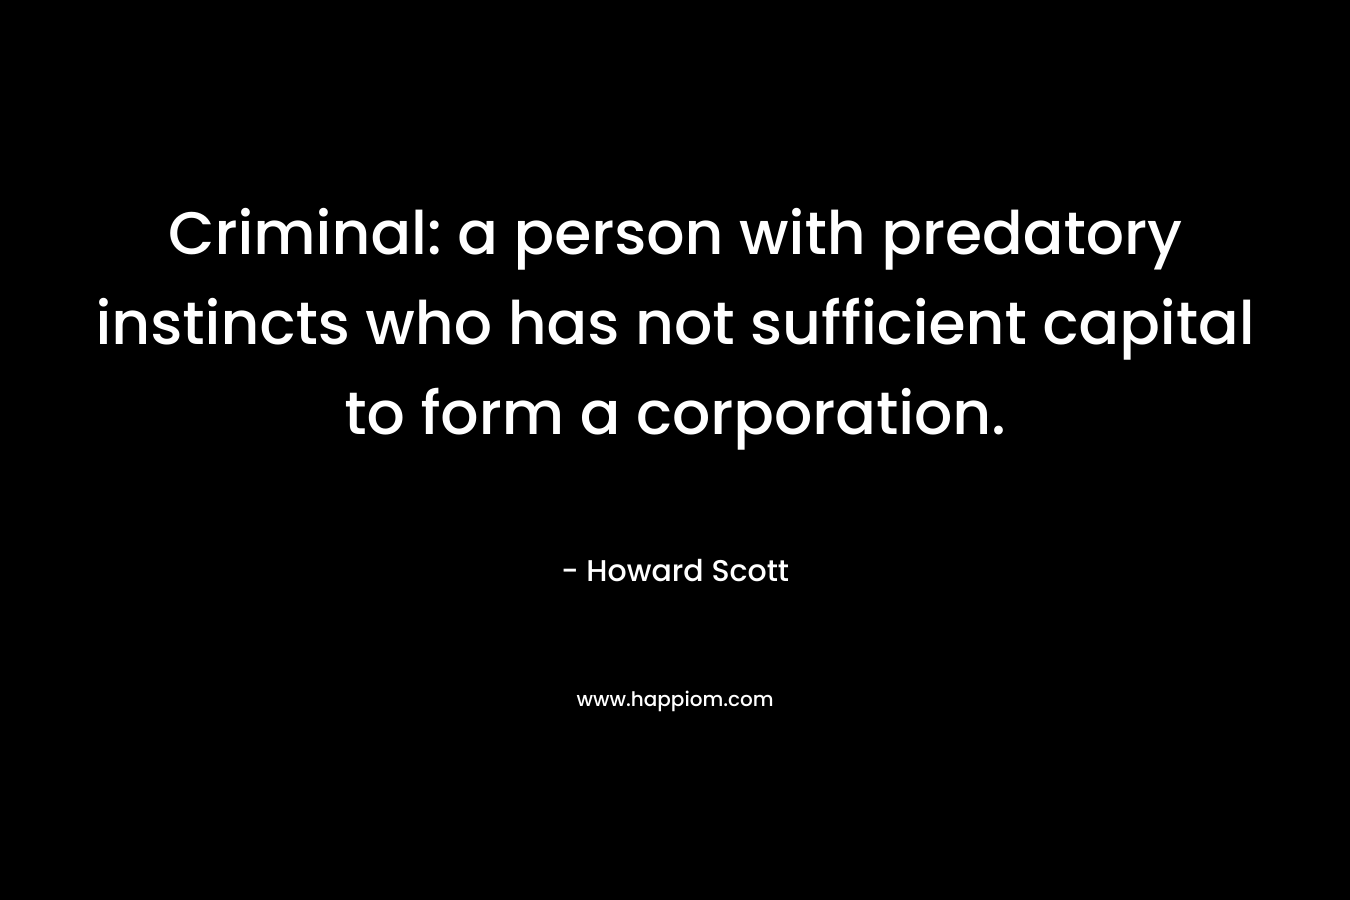 Criminal: a person with predatory instincts who has not sufficient capital to form a corporation. – Howard Scott